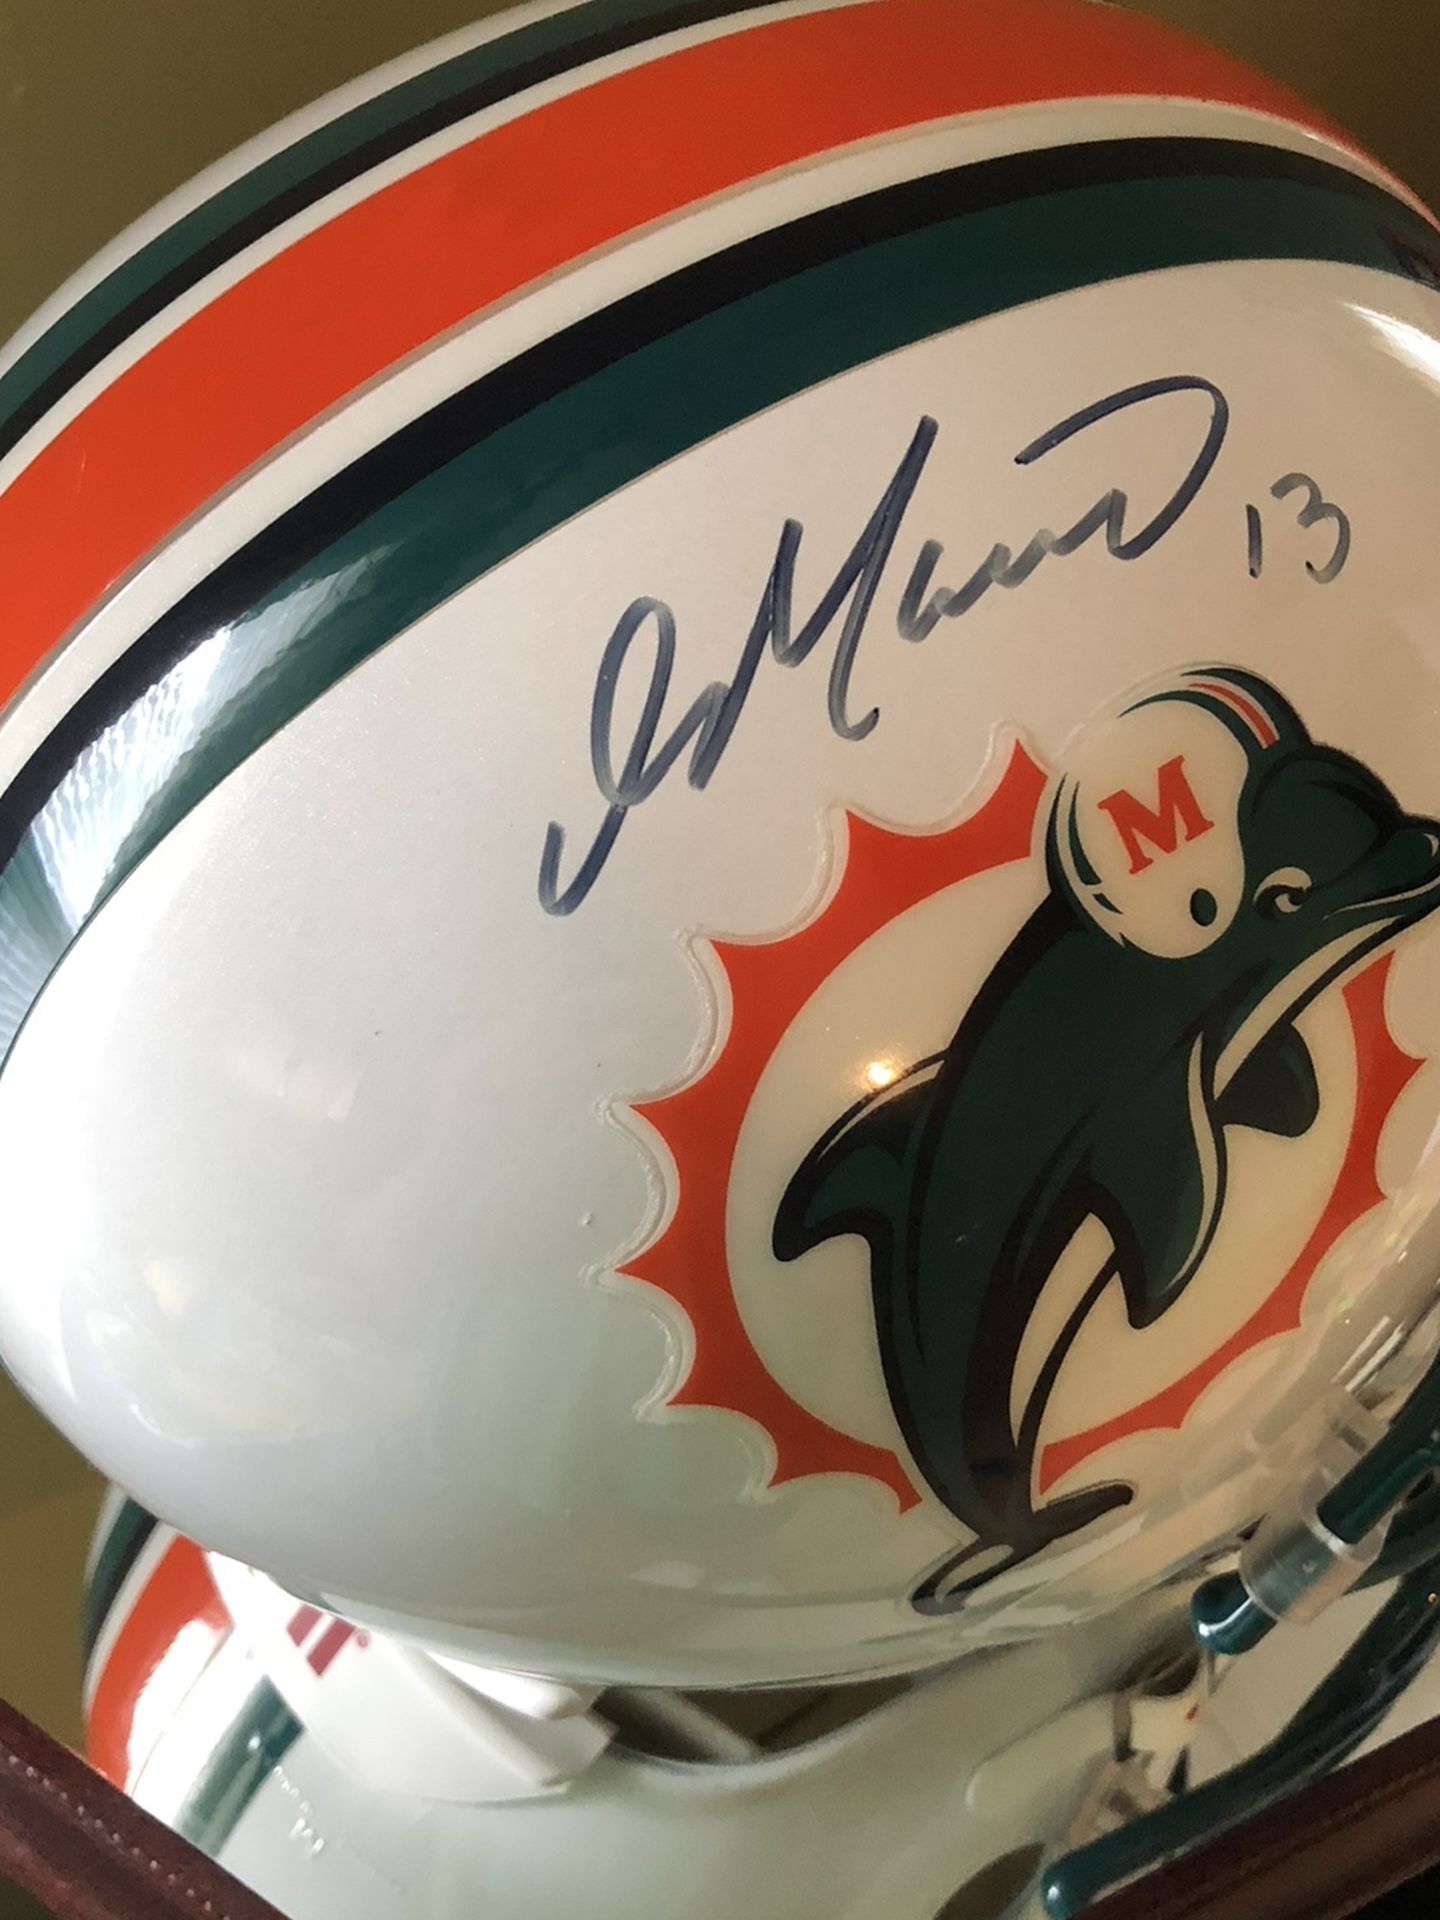 Authentic Dan Marino Signed Full Size Helmet With Glass UV Protective Case